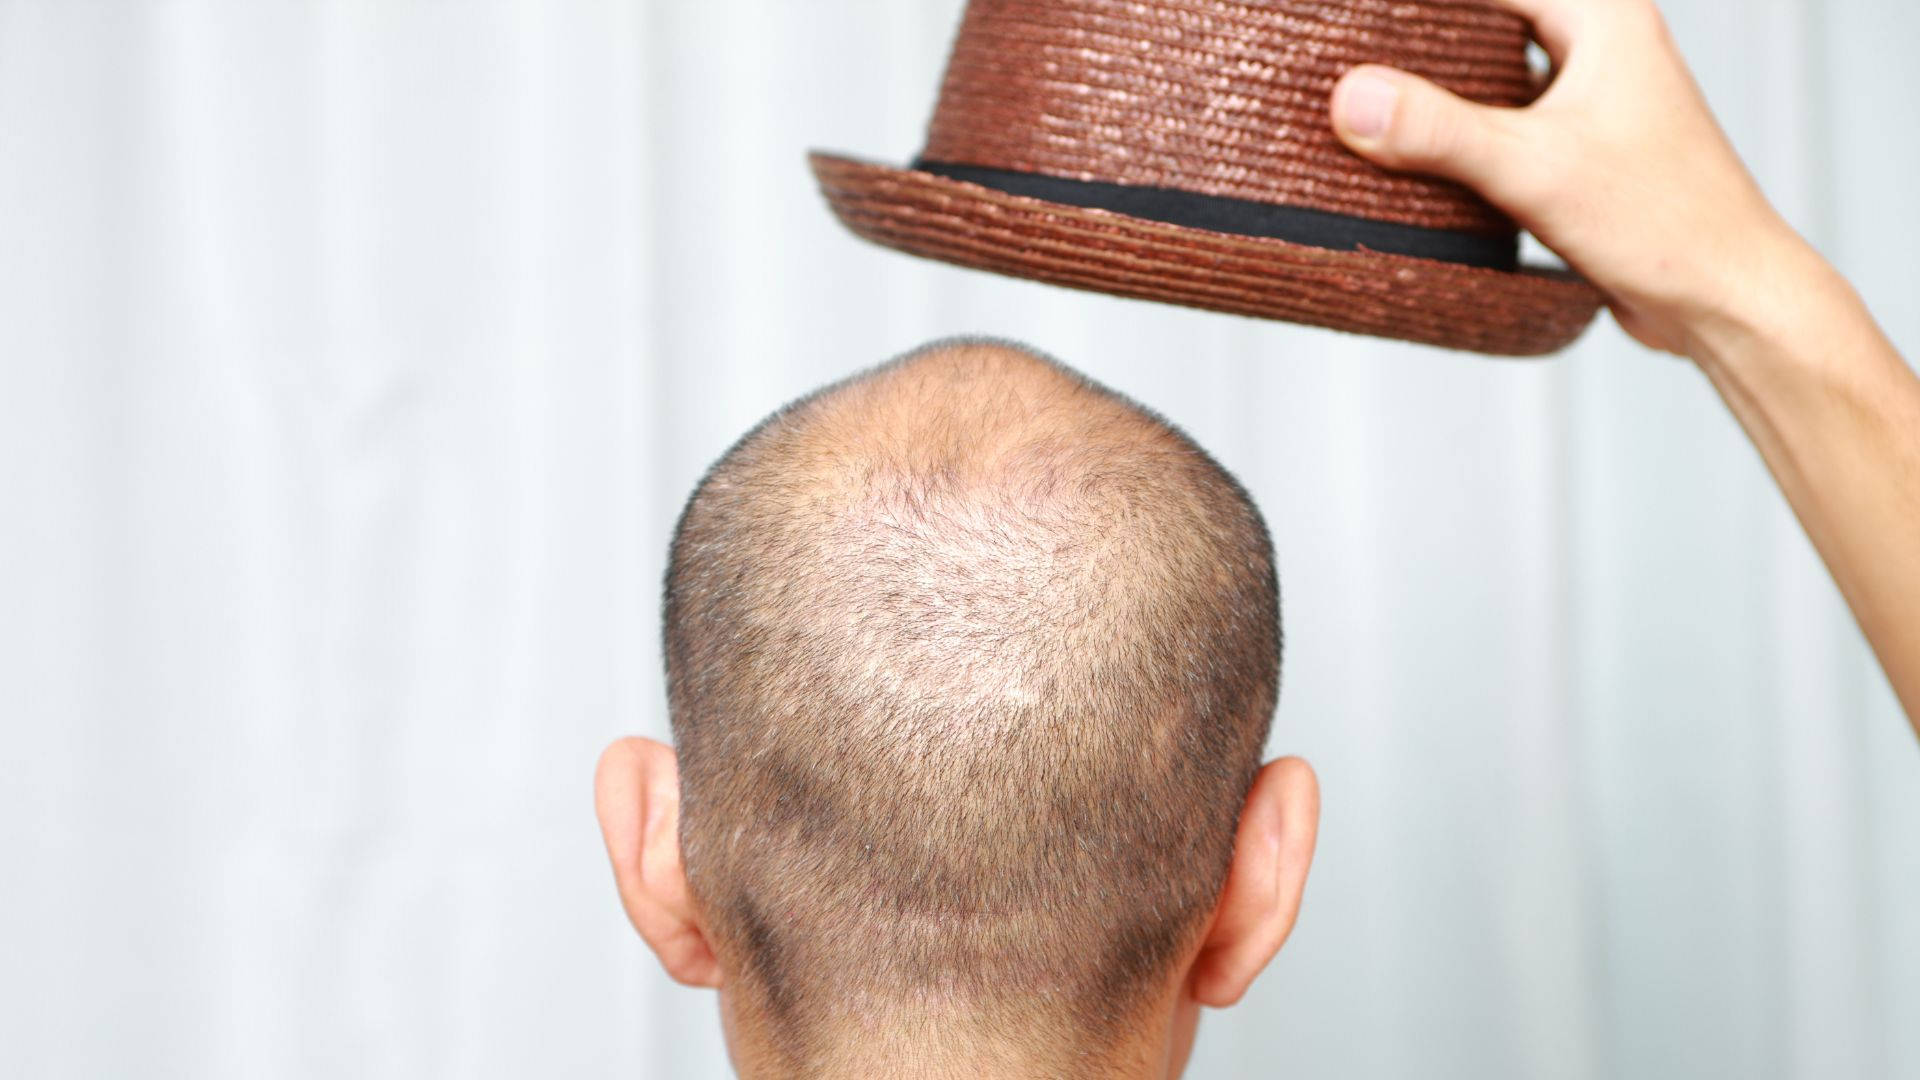 Bald Man Holding A Brown Hat Picture